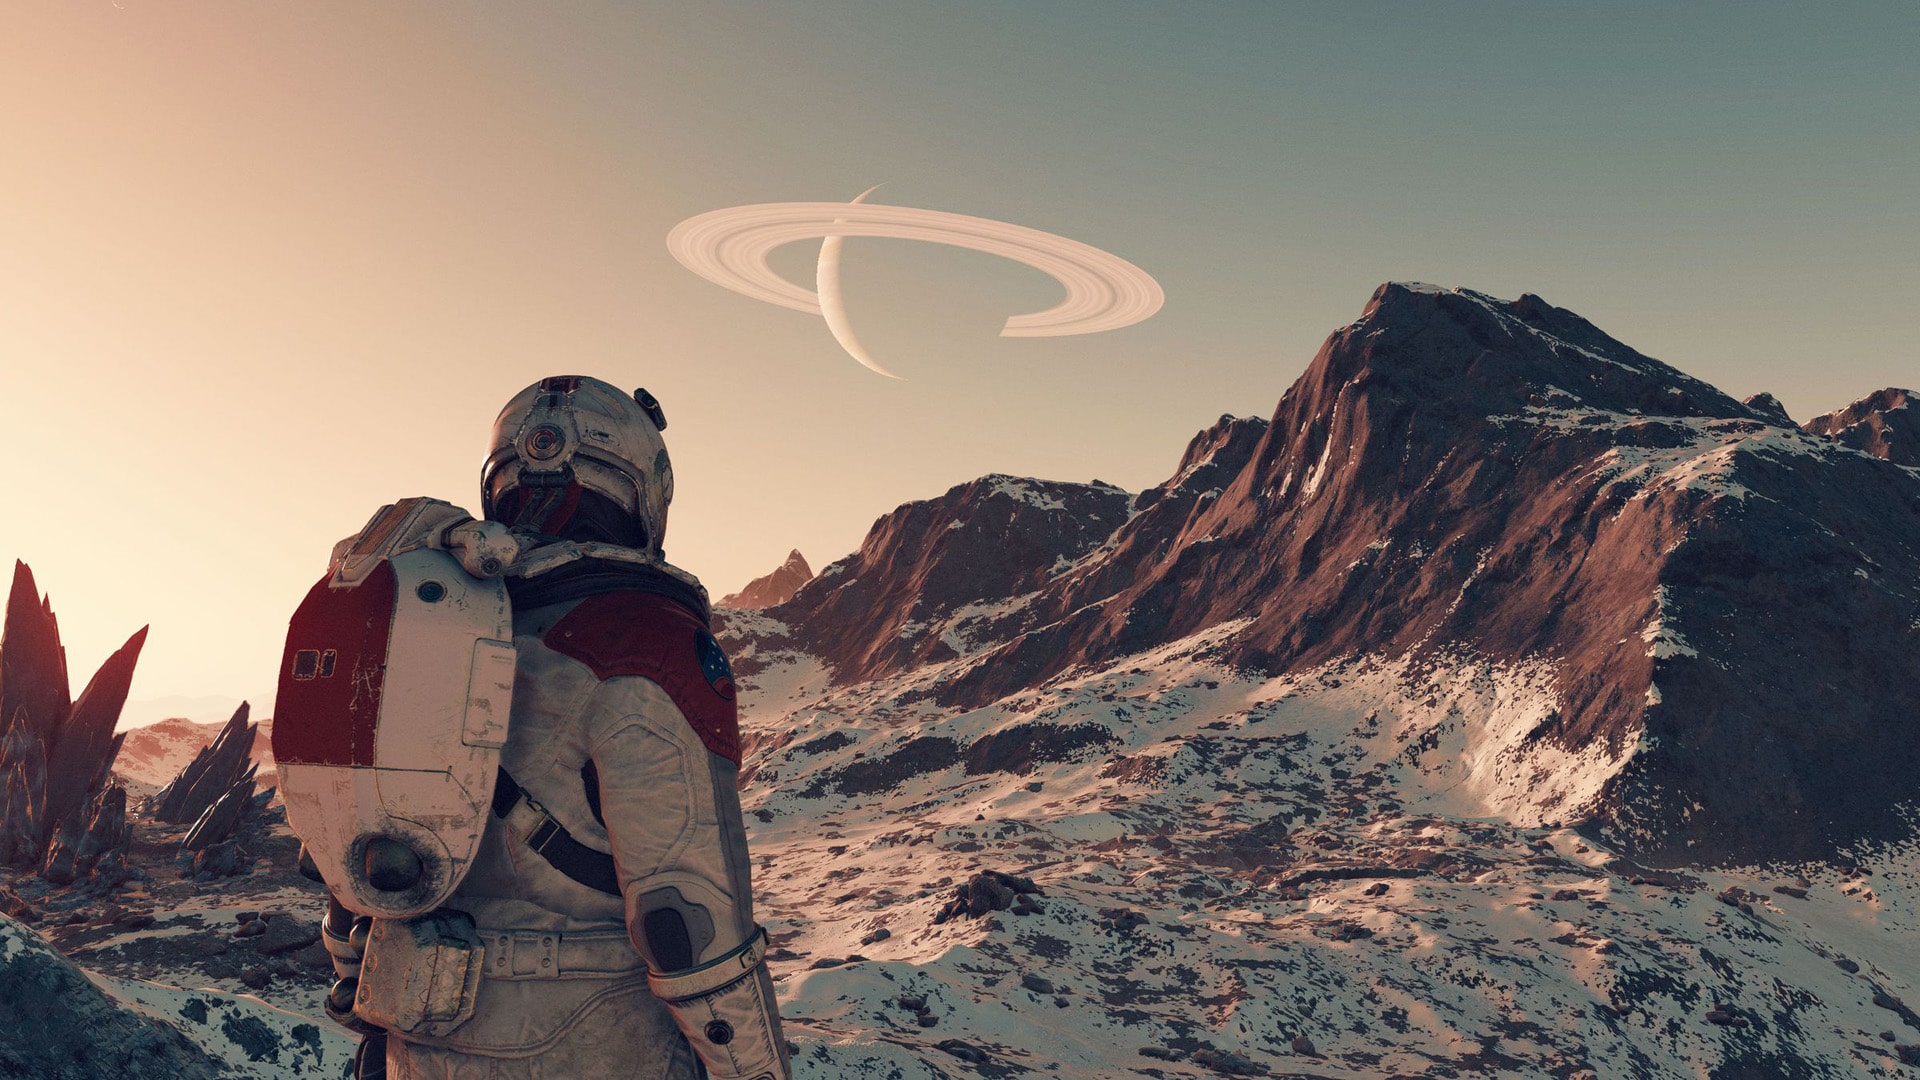 Astronaut exploring a foreign planet in Starfield game